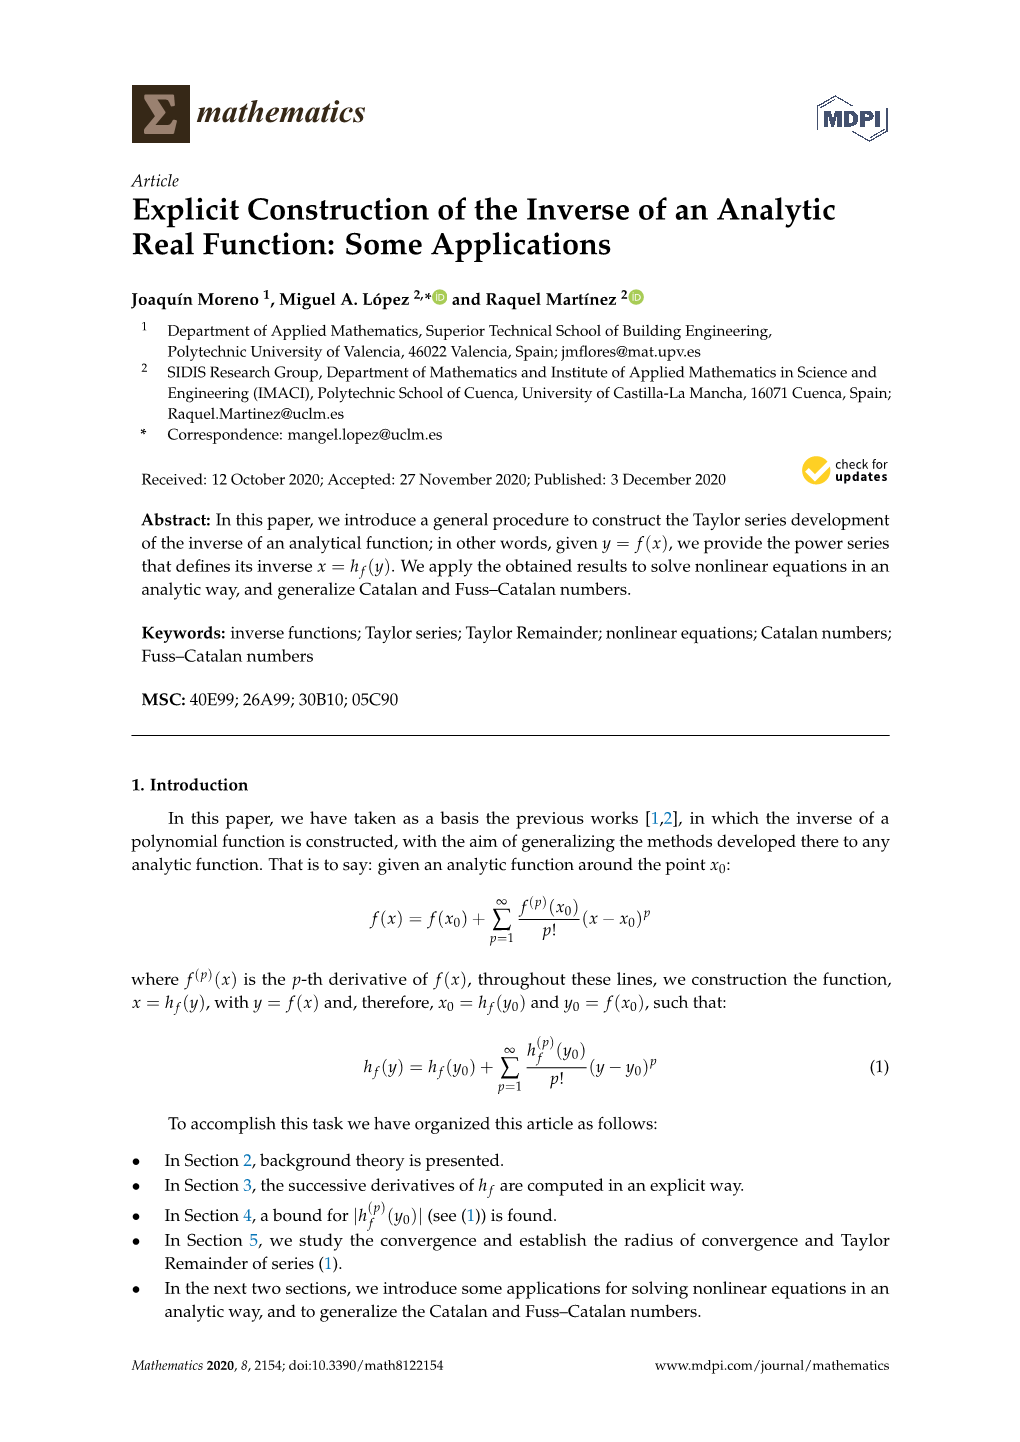 Explicit Construction of the Inverse of an Analytic Real Function: Some Applications